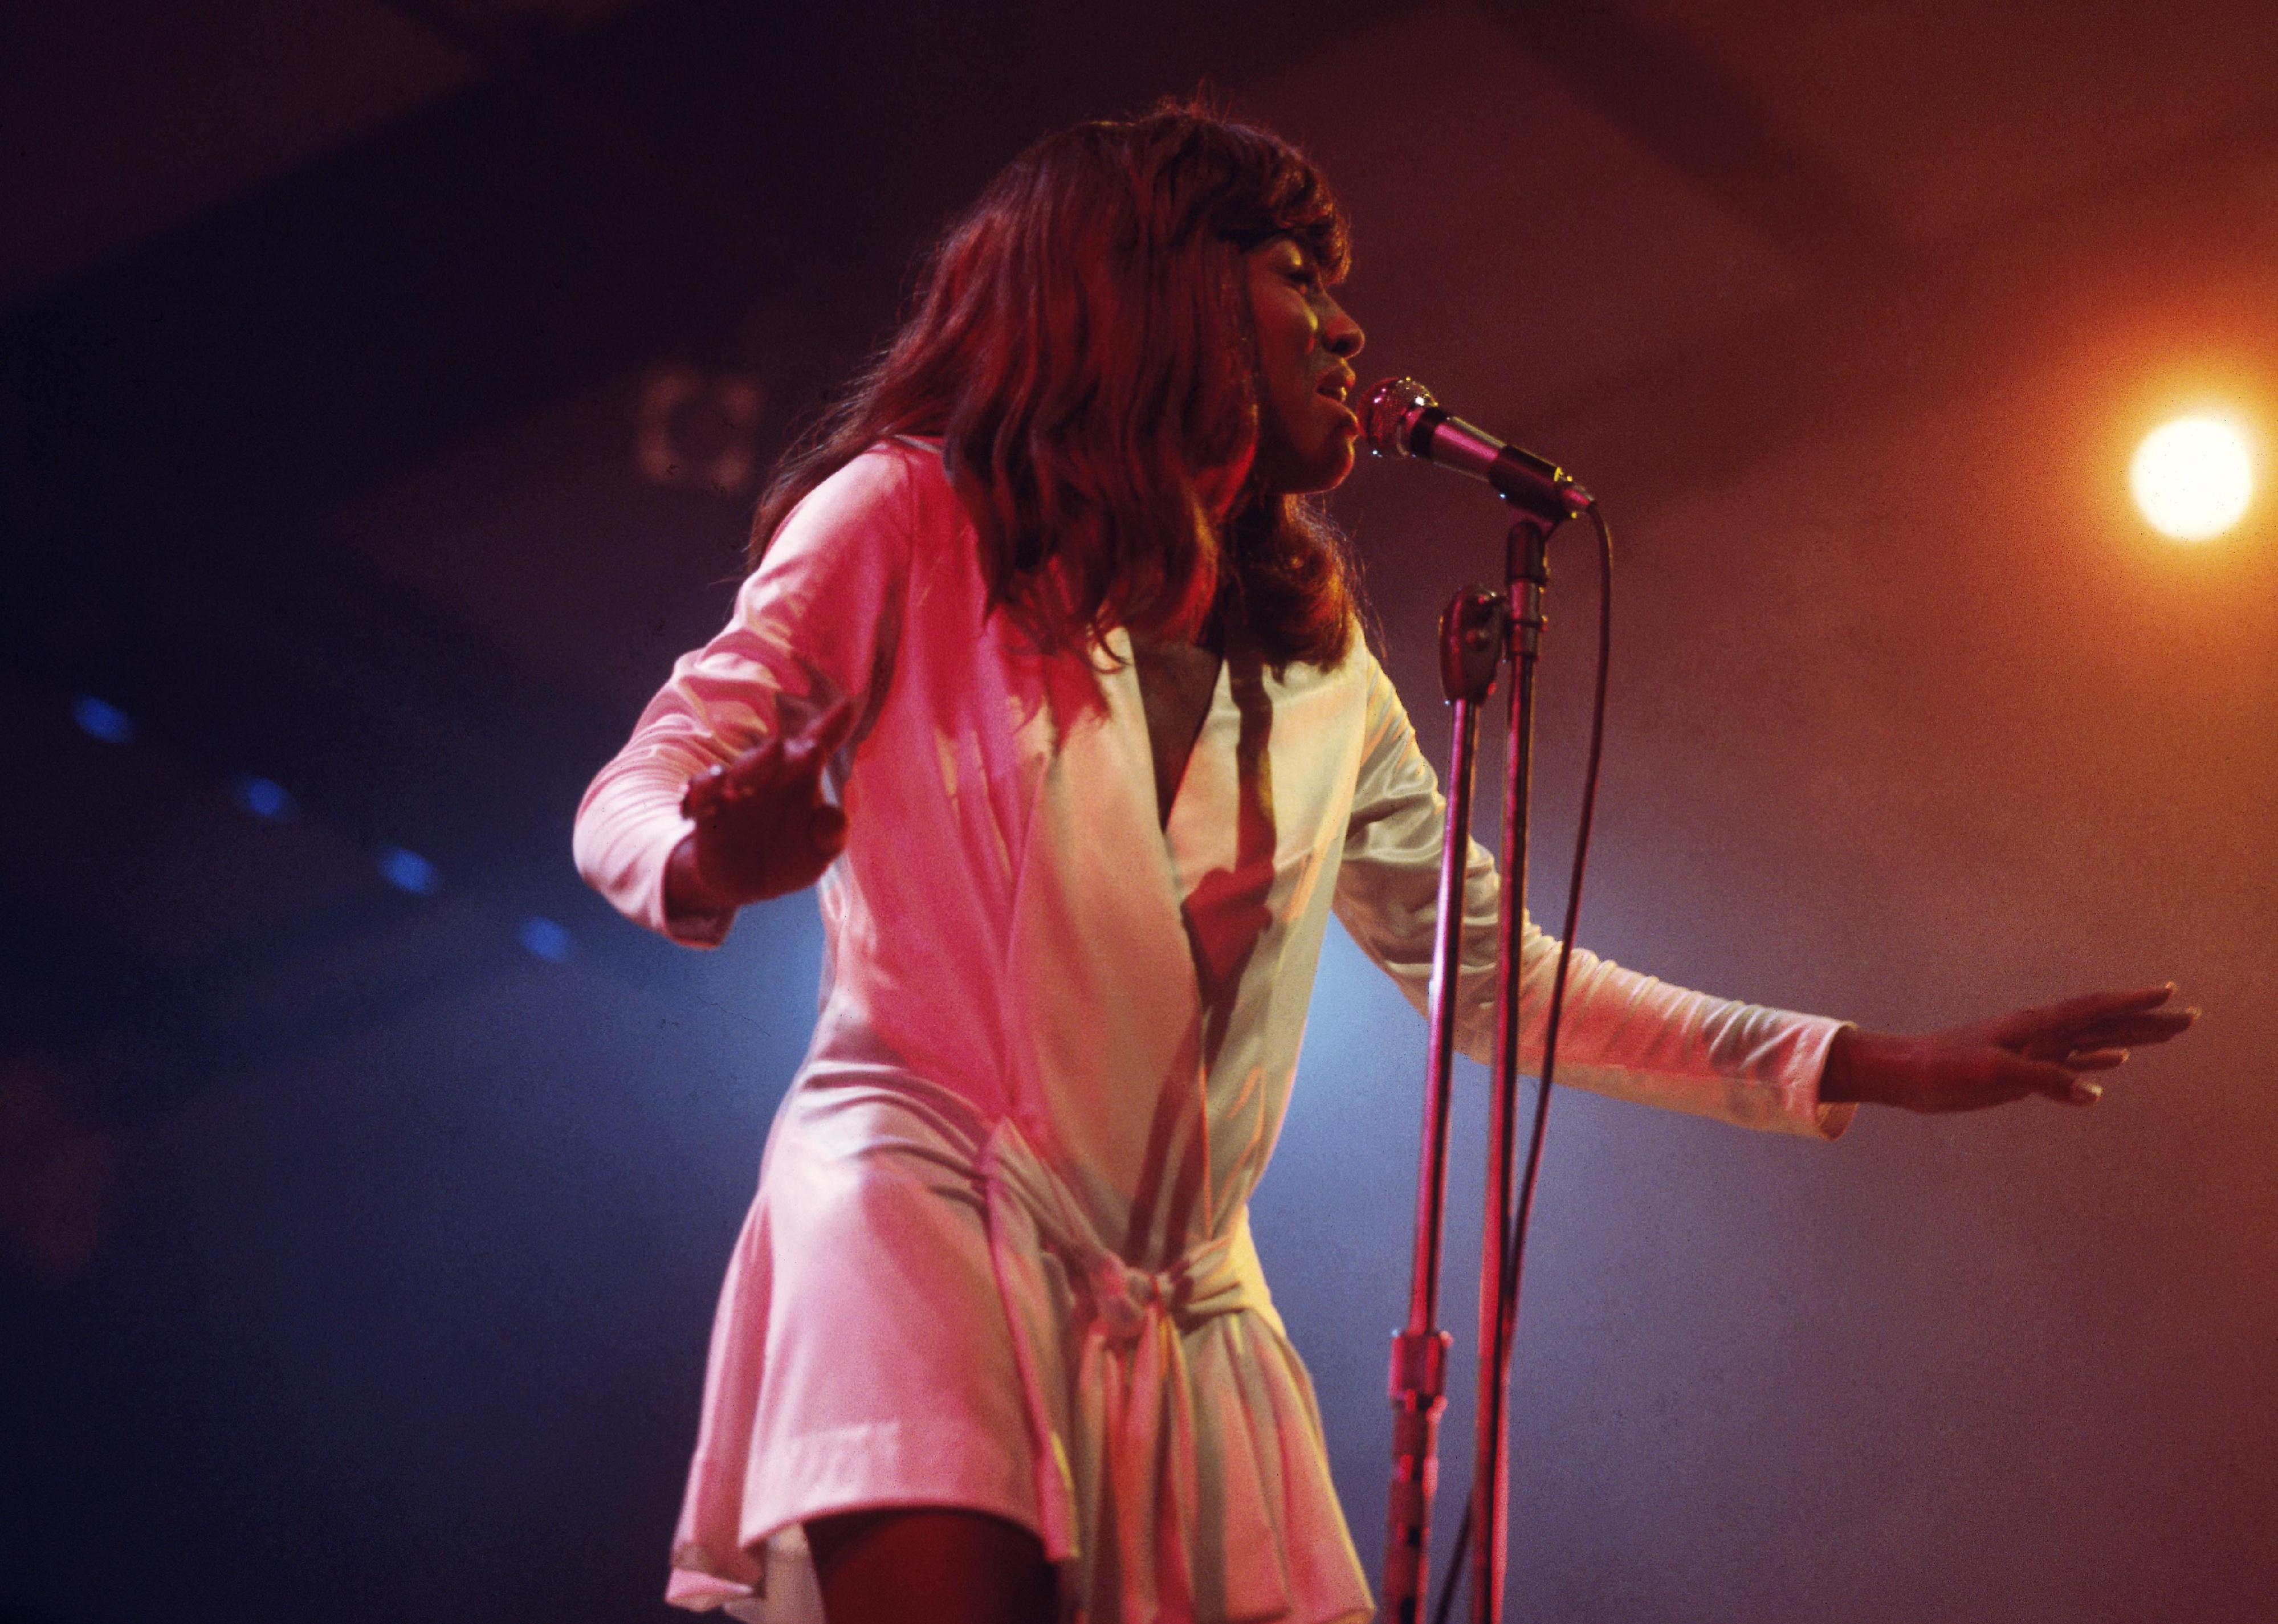 Tina Turner performs live on stage at the 1970 Newport Jazz Festival.